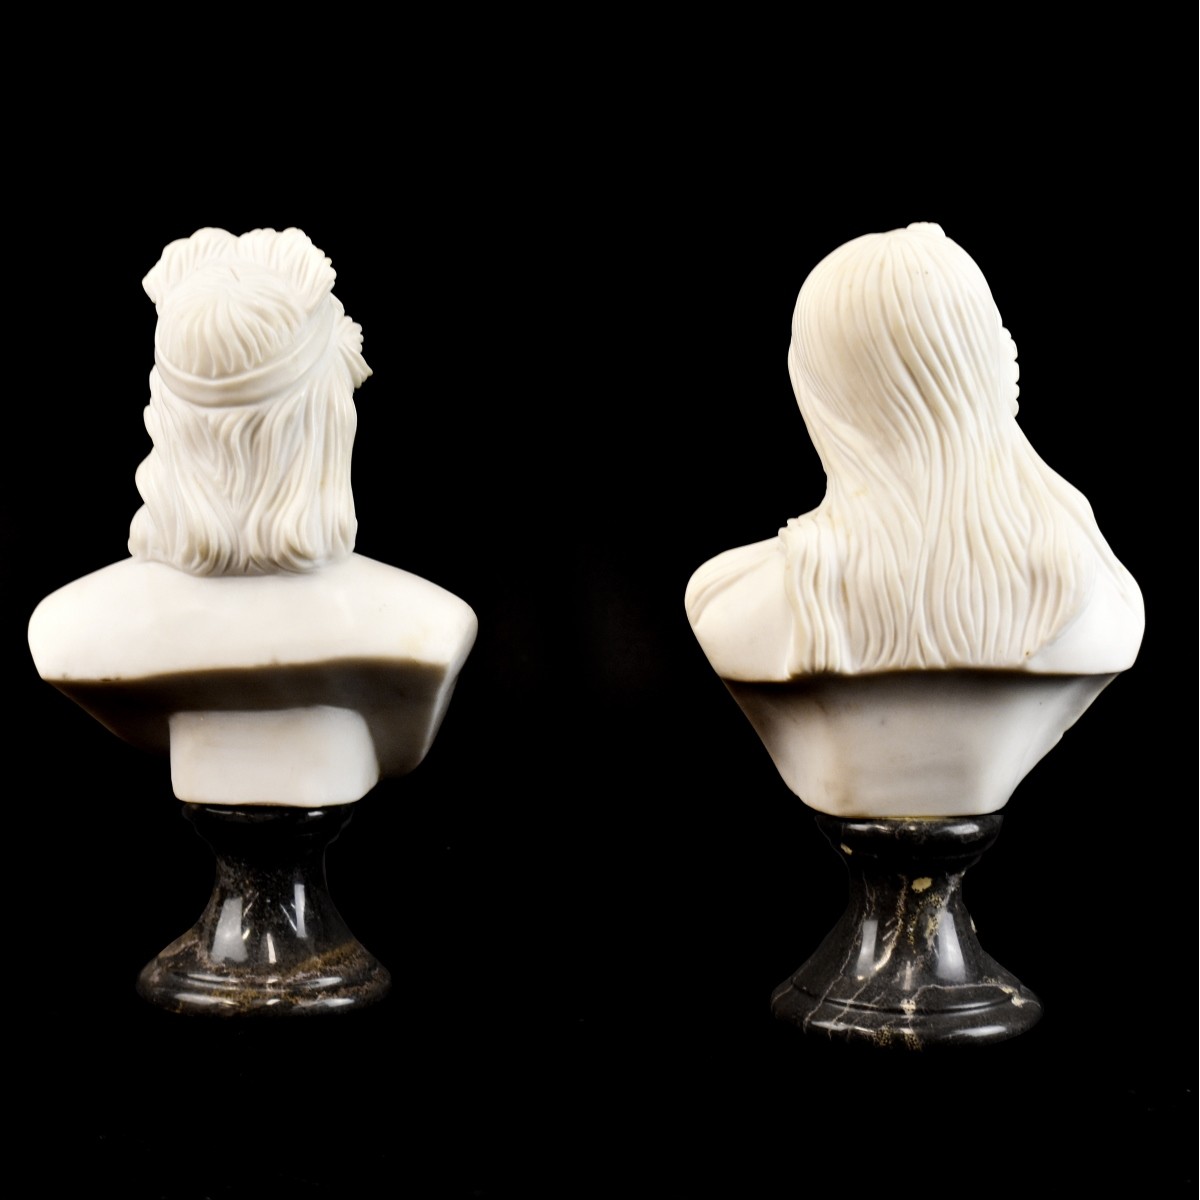 Pair of Neoclassical Style Marble Sculptures